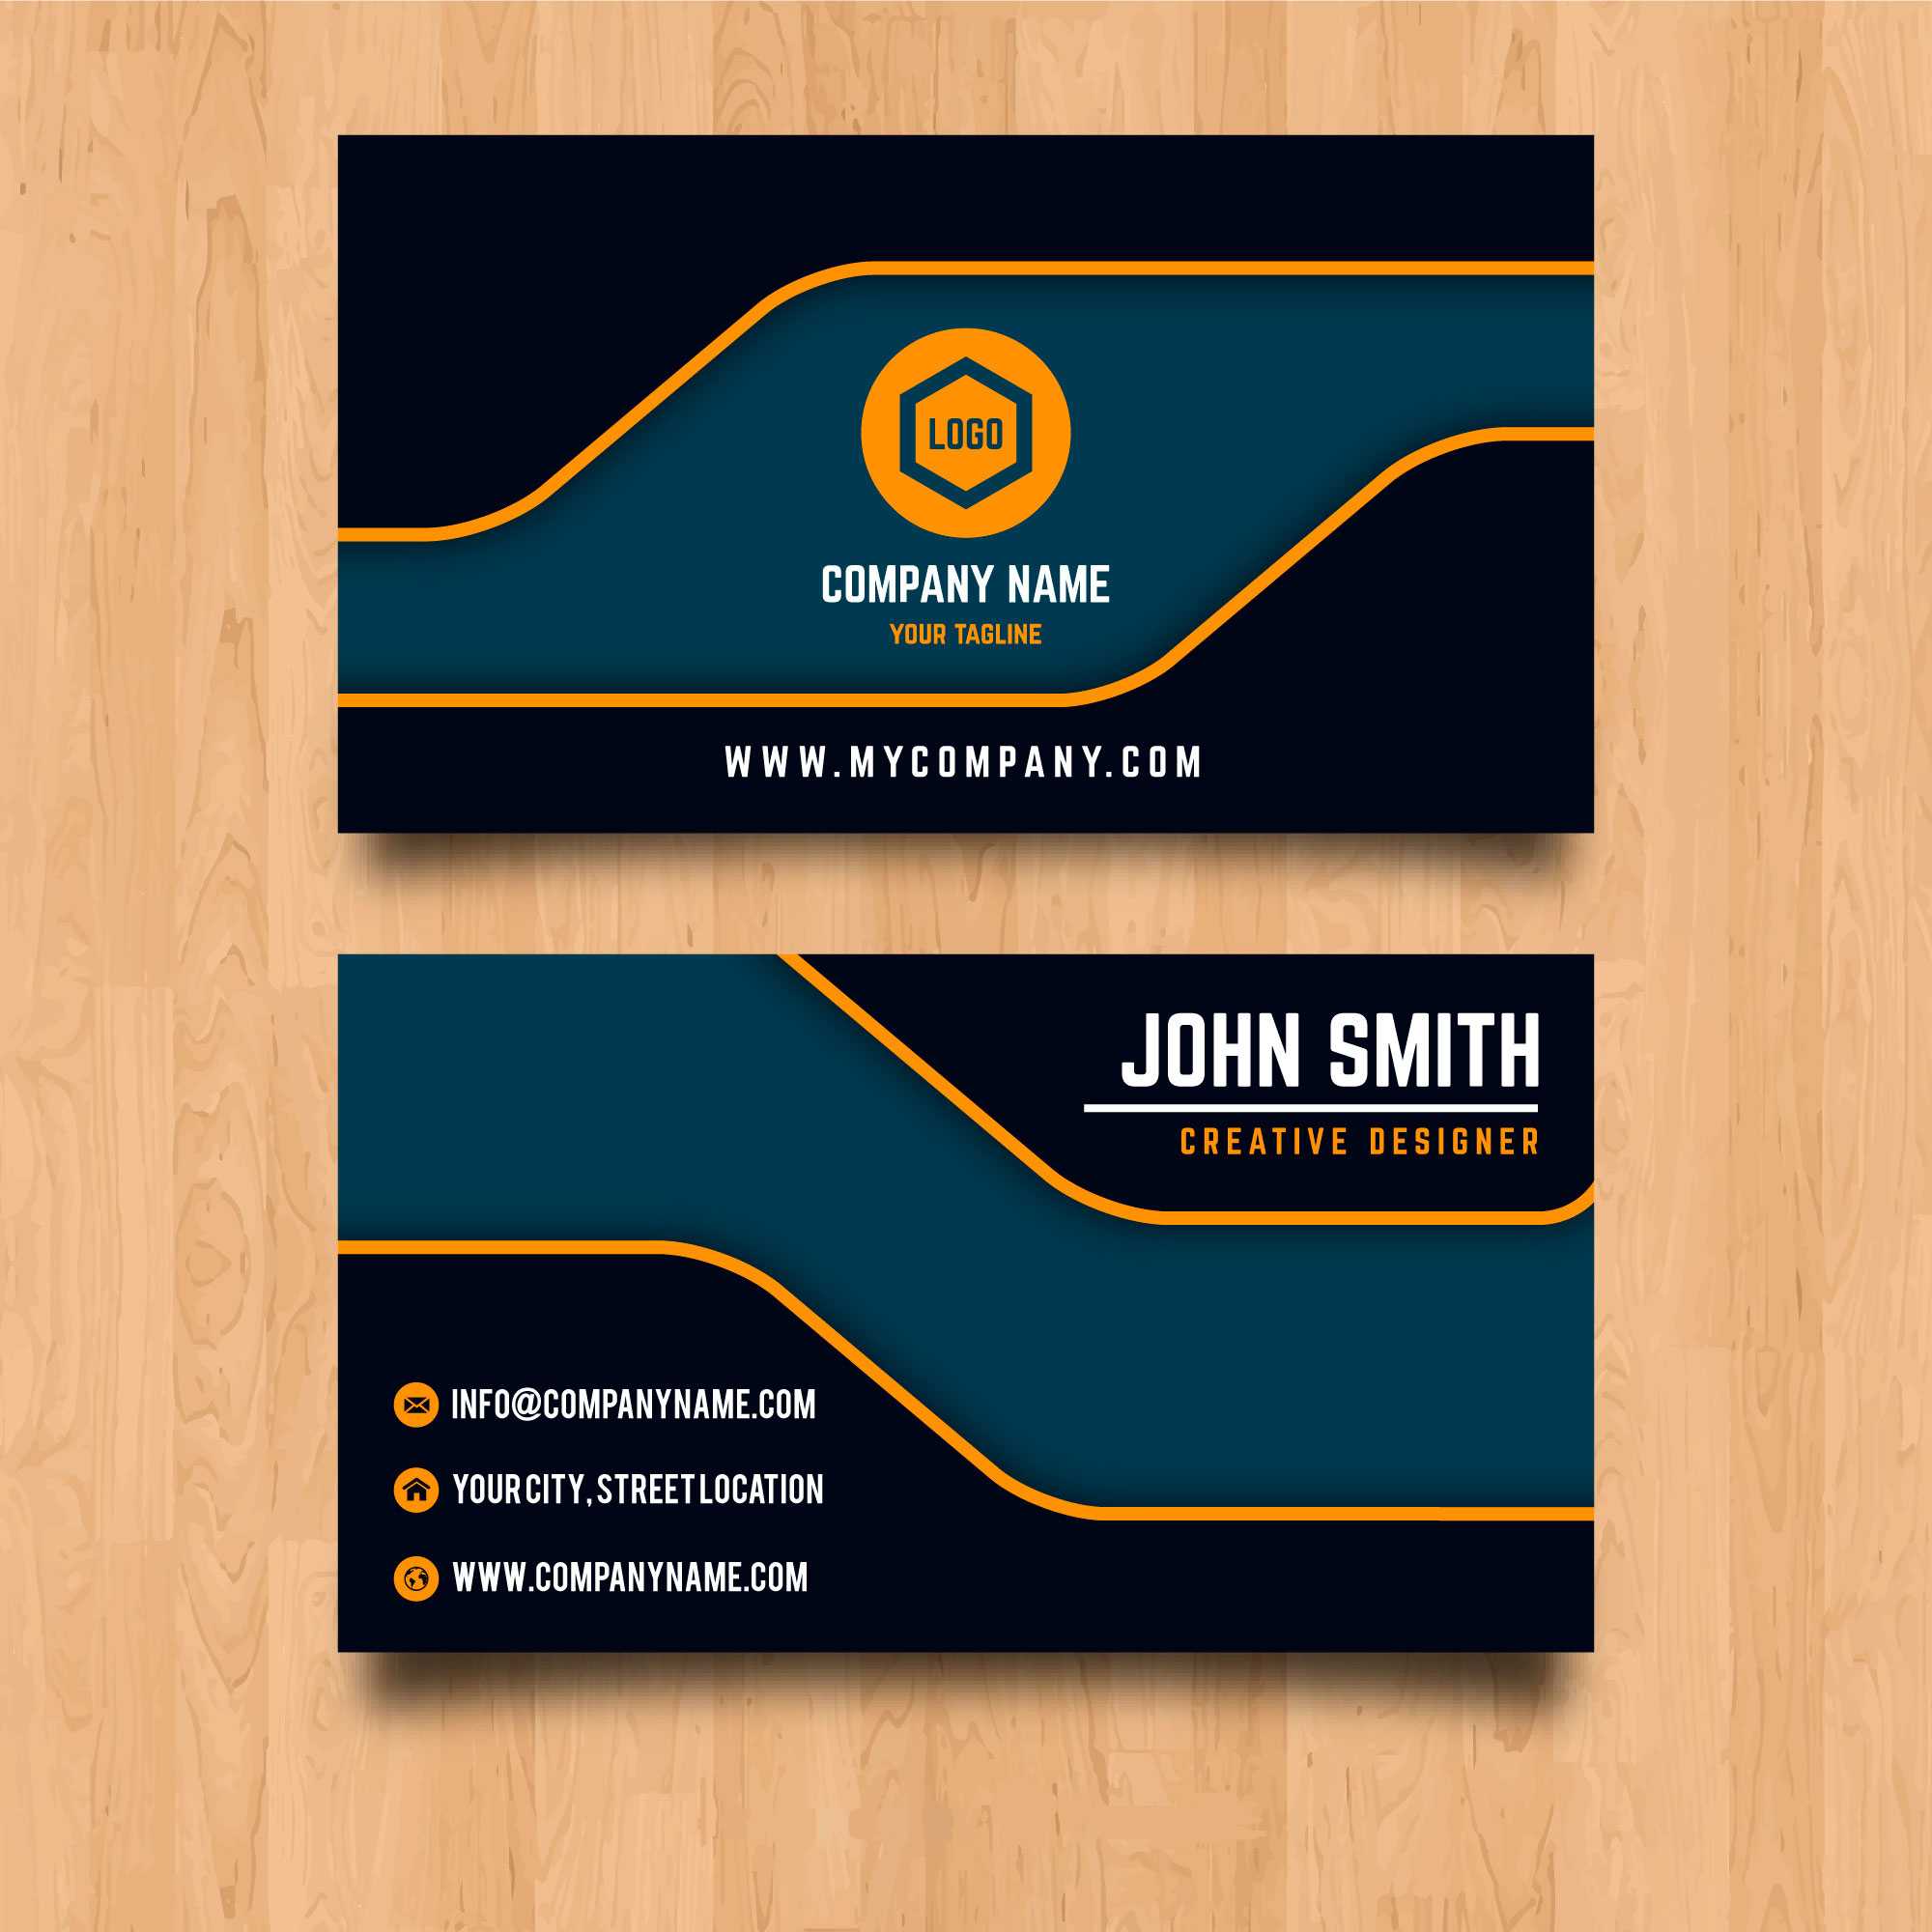 Personal Visiting Card Template Generator | Free Customize Within Free Personal Business Card Templates